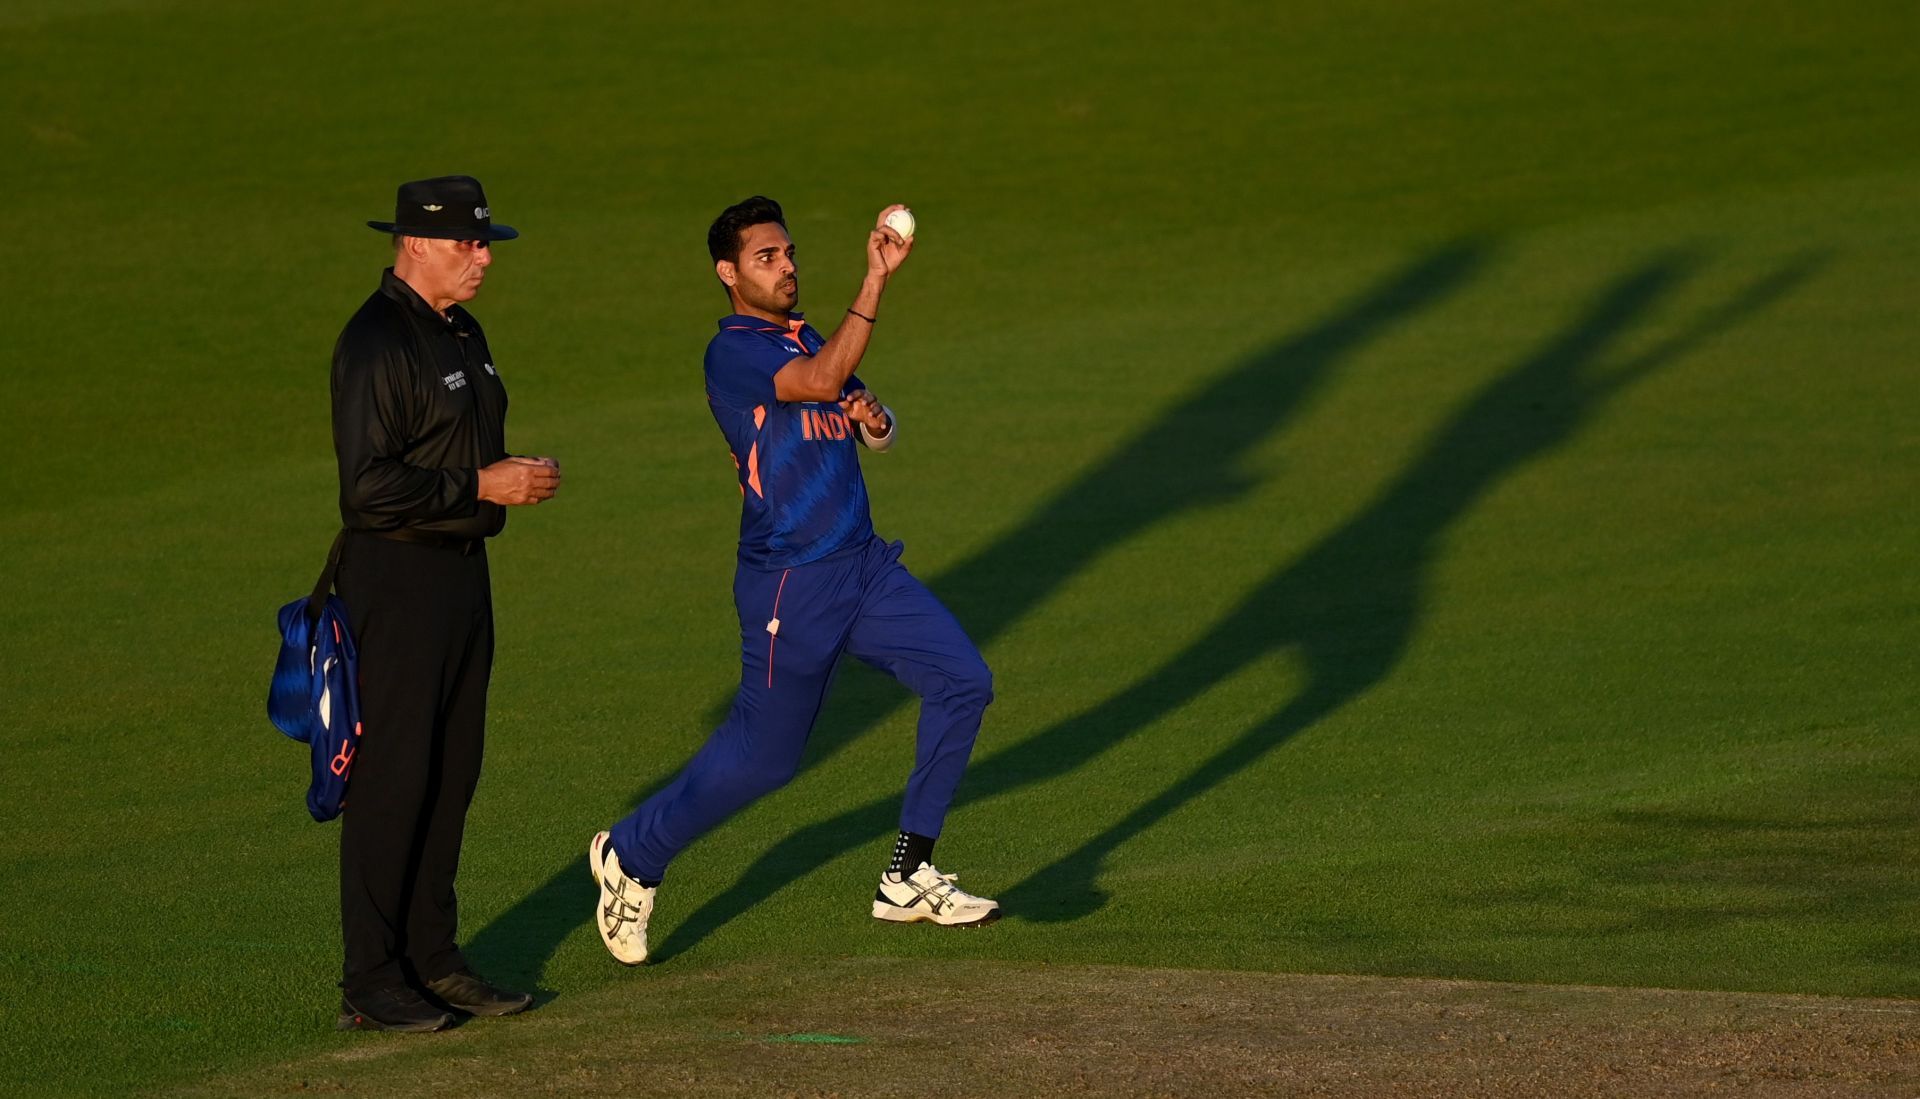 Bhuvneshwar Kumar castled Shamarh Brooks with an incoming delivery